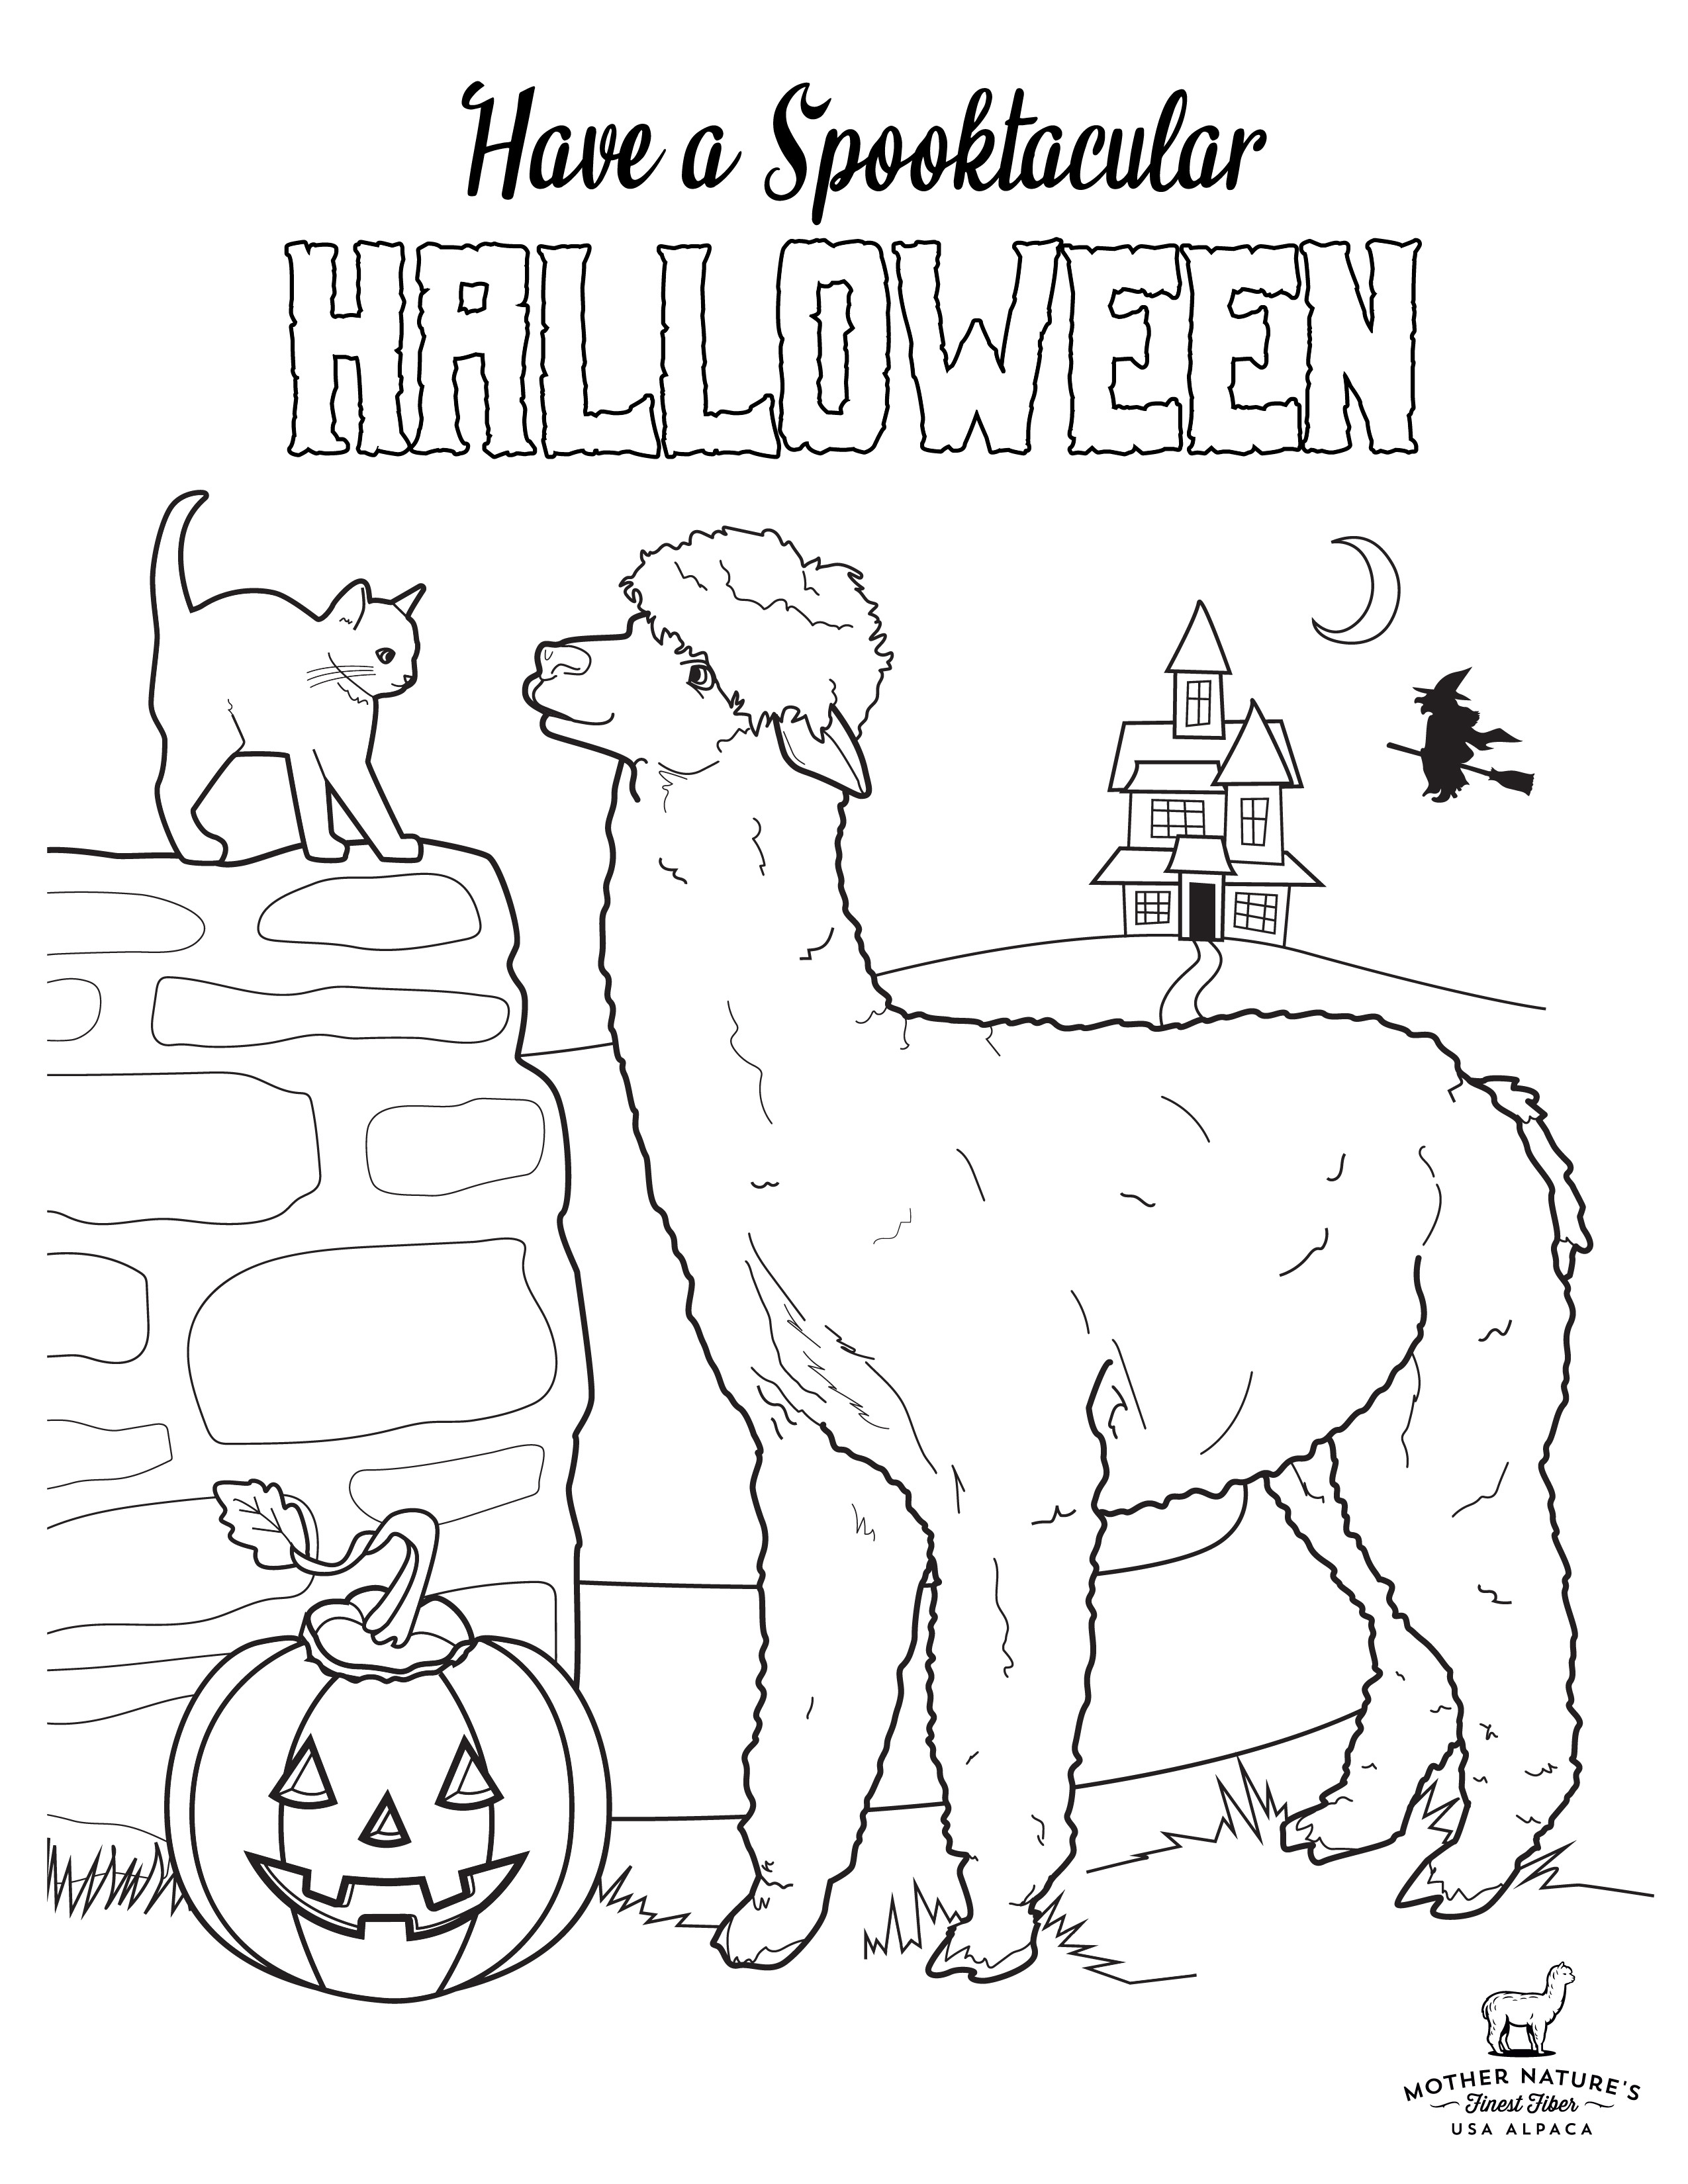 NEW Downloadable Content: Halloween Coloring Page!